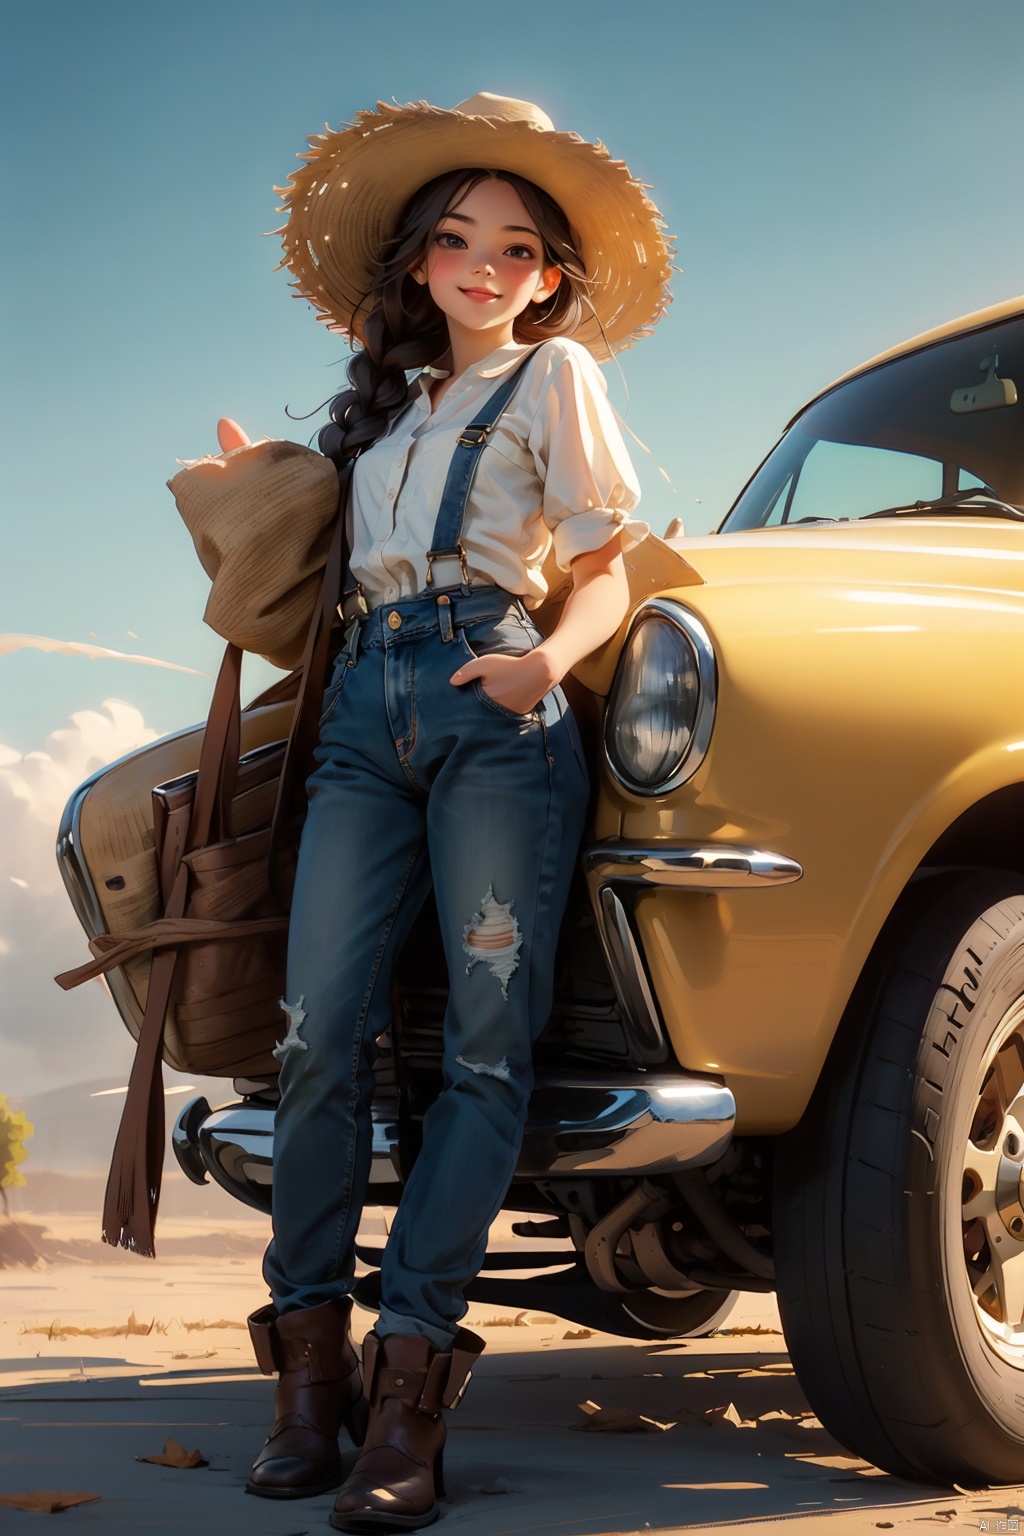 masterpiece, best quality, 8K,illustration, colorful, The rich visuals depict the joy of outdoor travel. car  Vacation girl, a girl wearing black suspenders and jeans, This is a very thin girl, not very plump, Black Fried Dough Twists Braid and black eyes, Sitting on the ground with your back against a yellow car. Wearing a cowboy hat on the head , best qualityhighly detailed, realistic rendering, Cute Smiling Girl。This painting captures the essence of innocence, beauty, and joy, making it a beautiful and captivating artwork, Fully express the joy of the character's vacatin, The girl should be thinner, Girls' clothes should not be too revealing , Hair fluttering in the wind